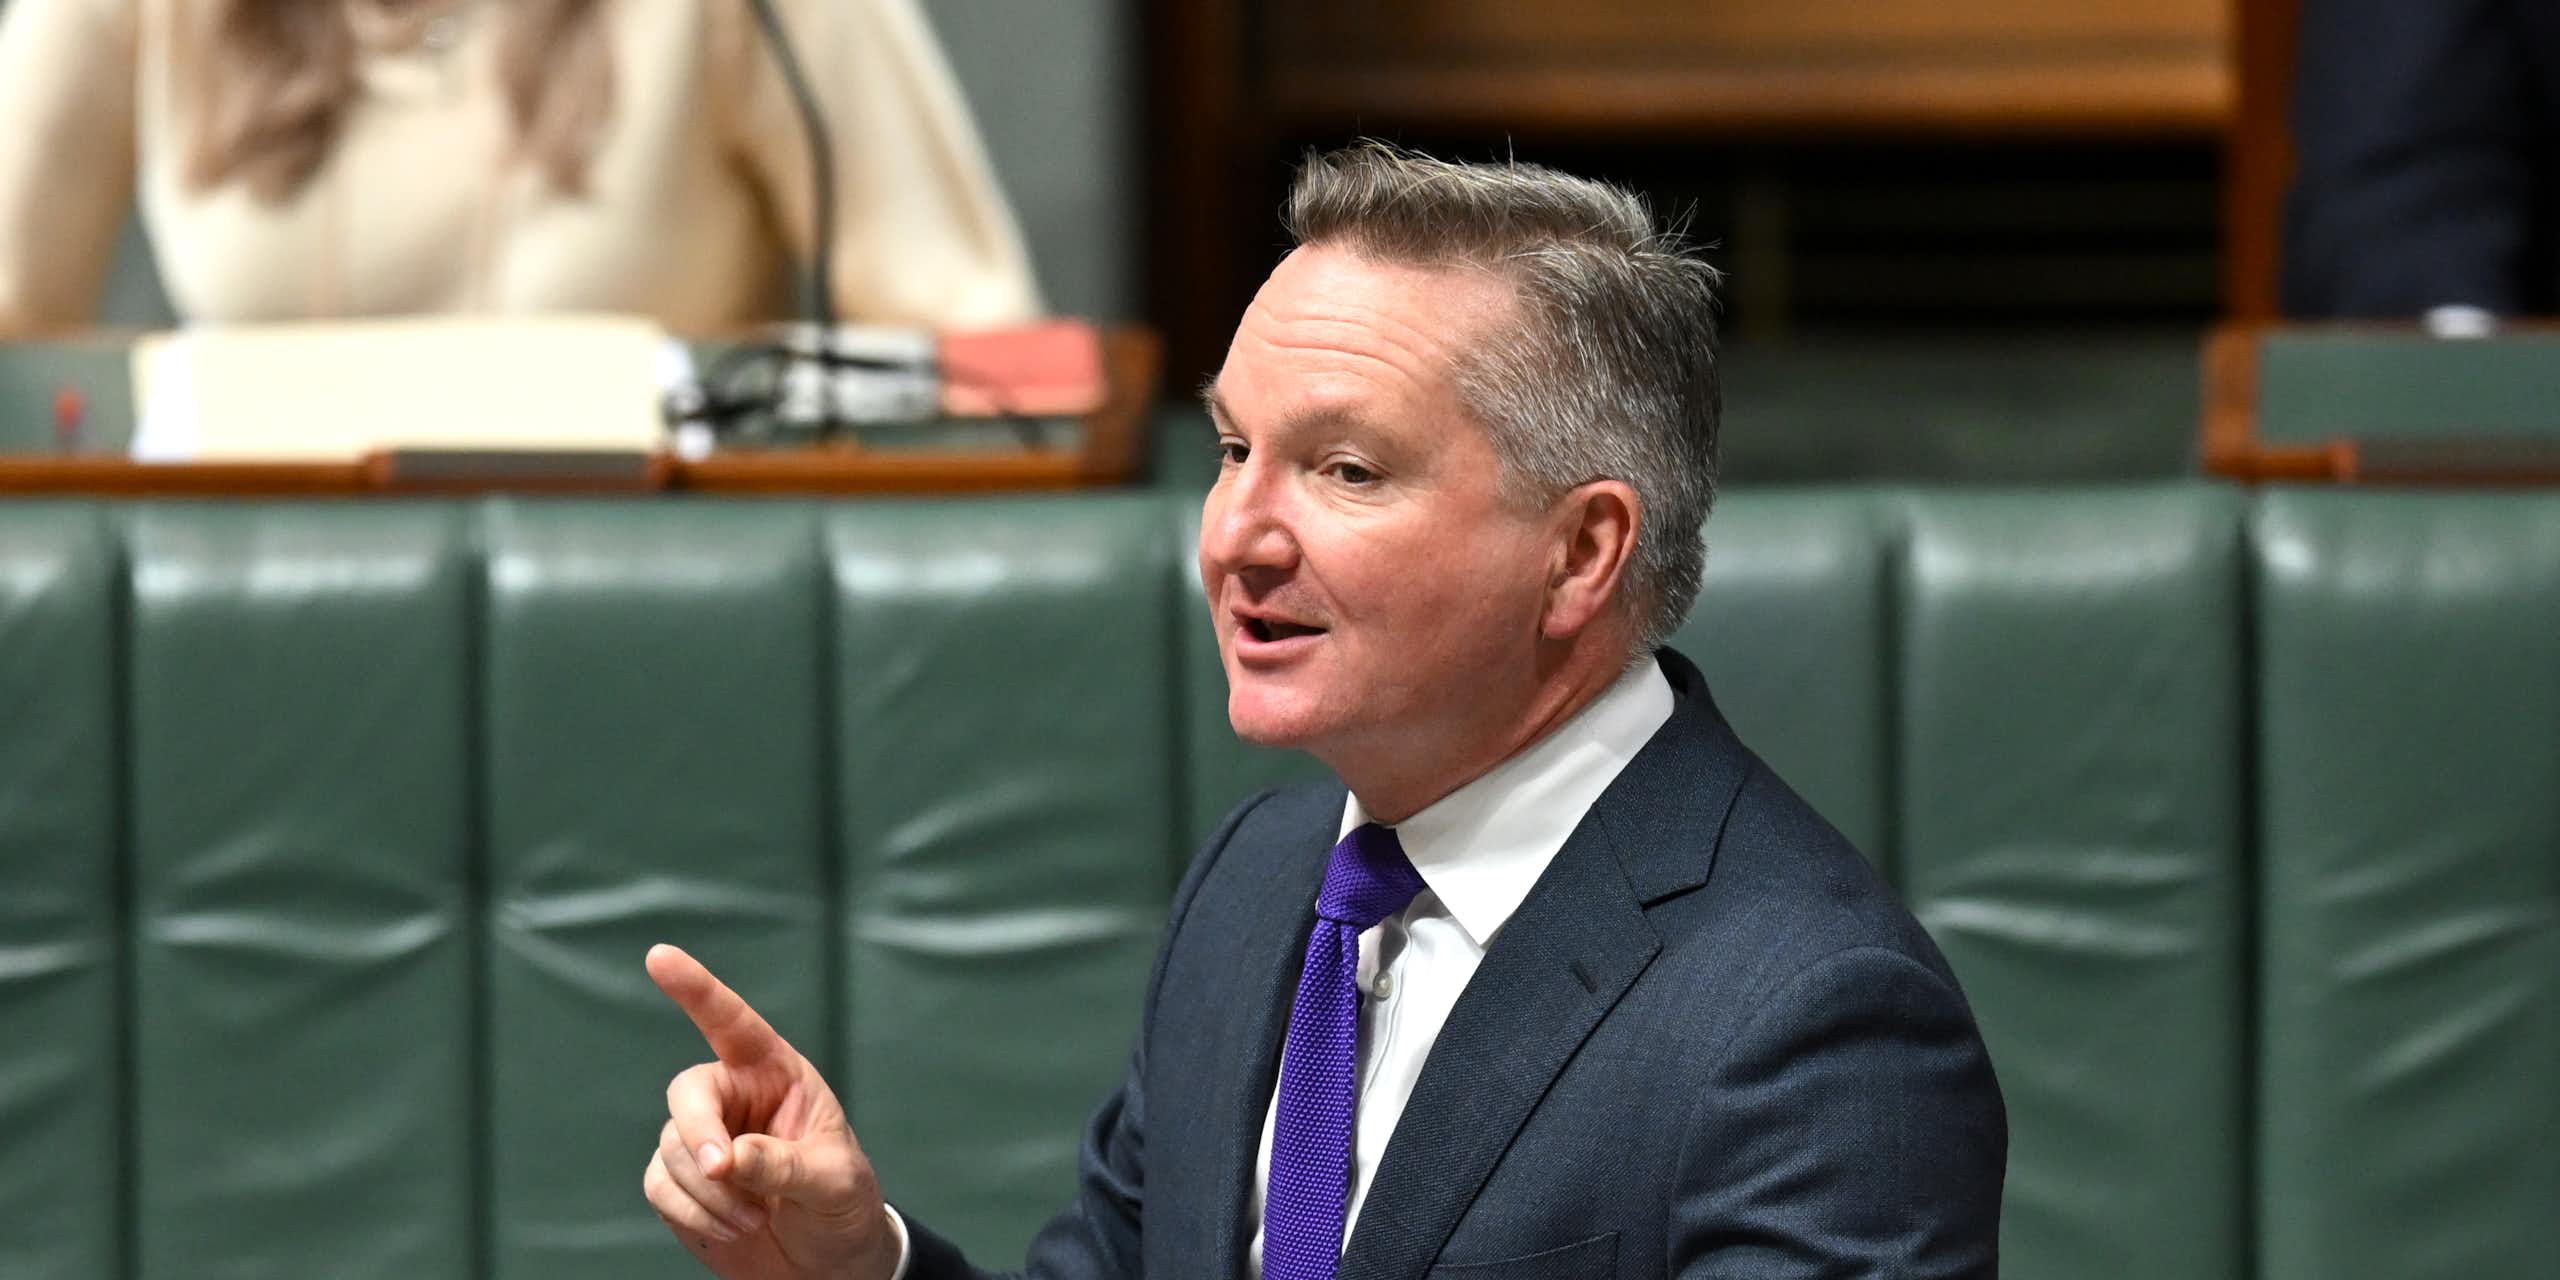 Politics with Michelle Grattan: Chris Bowen on ‘calling out’ claims about the energy transition’s cost